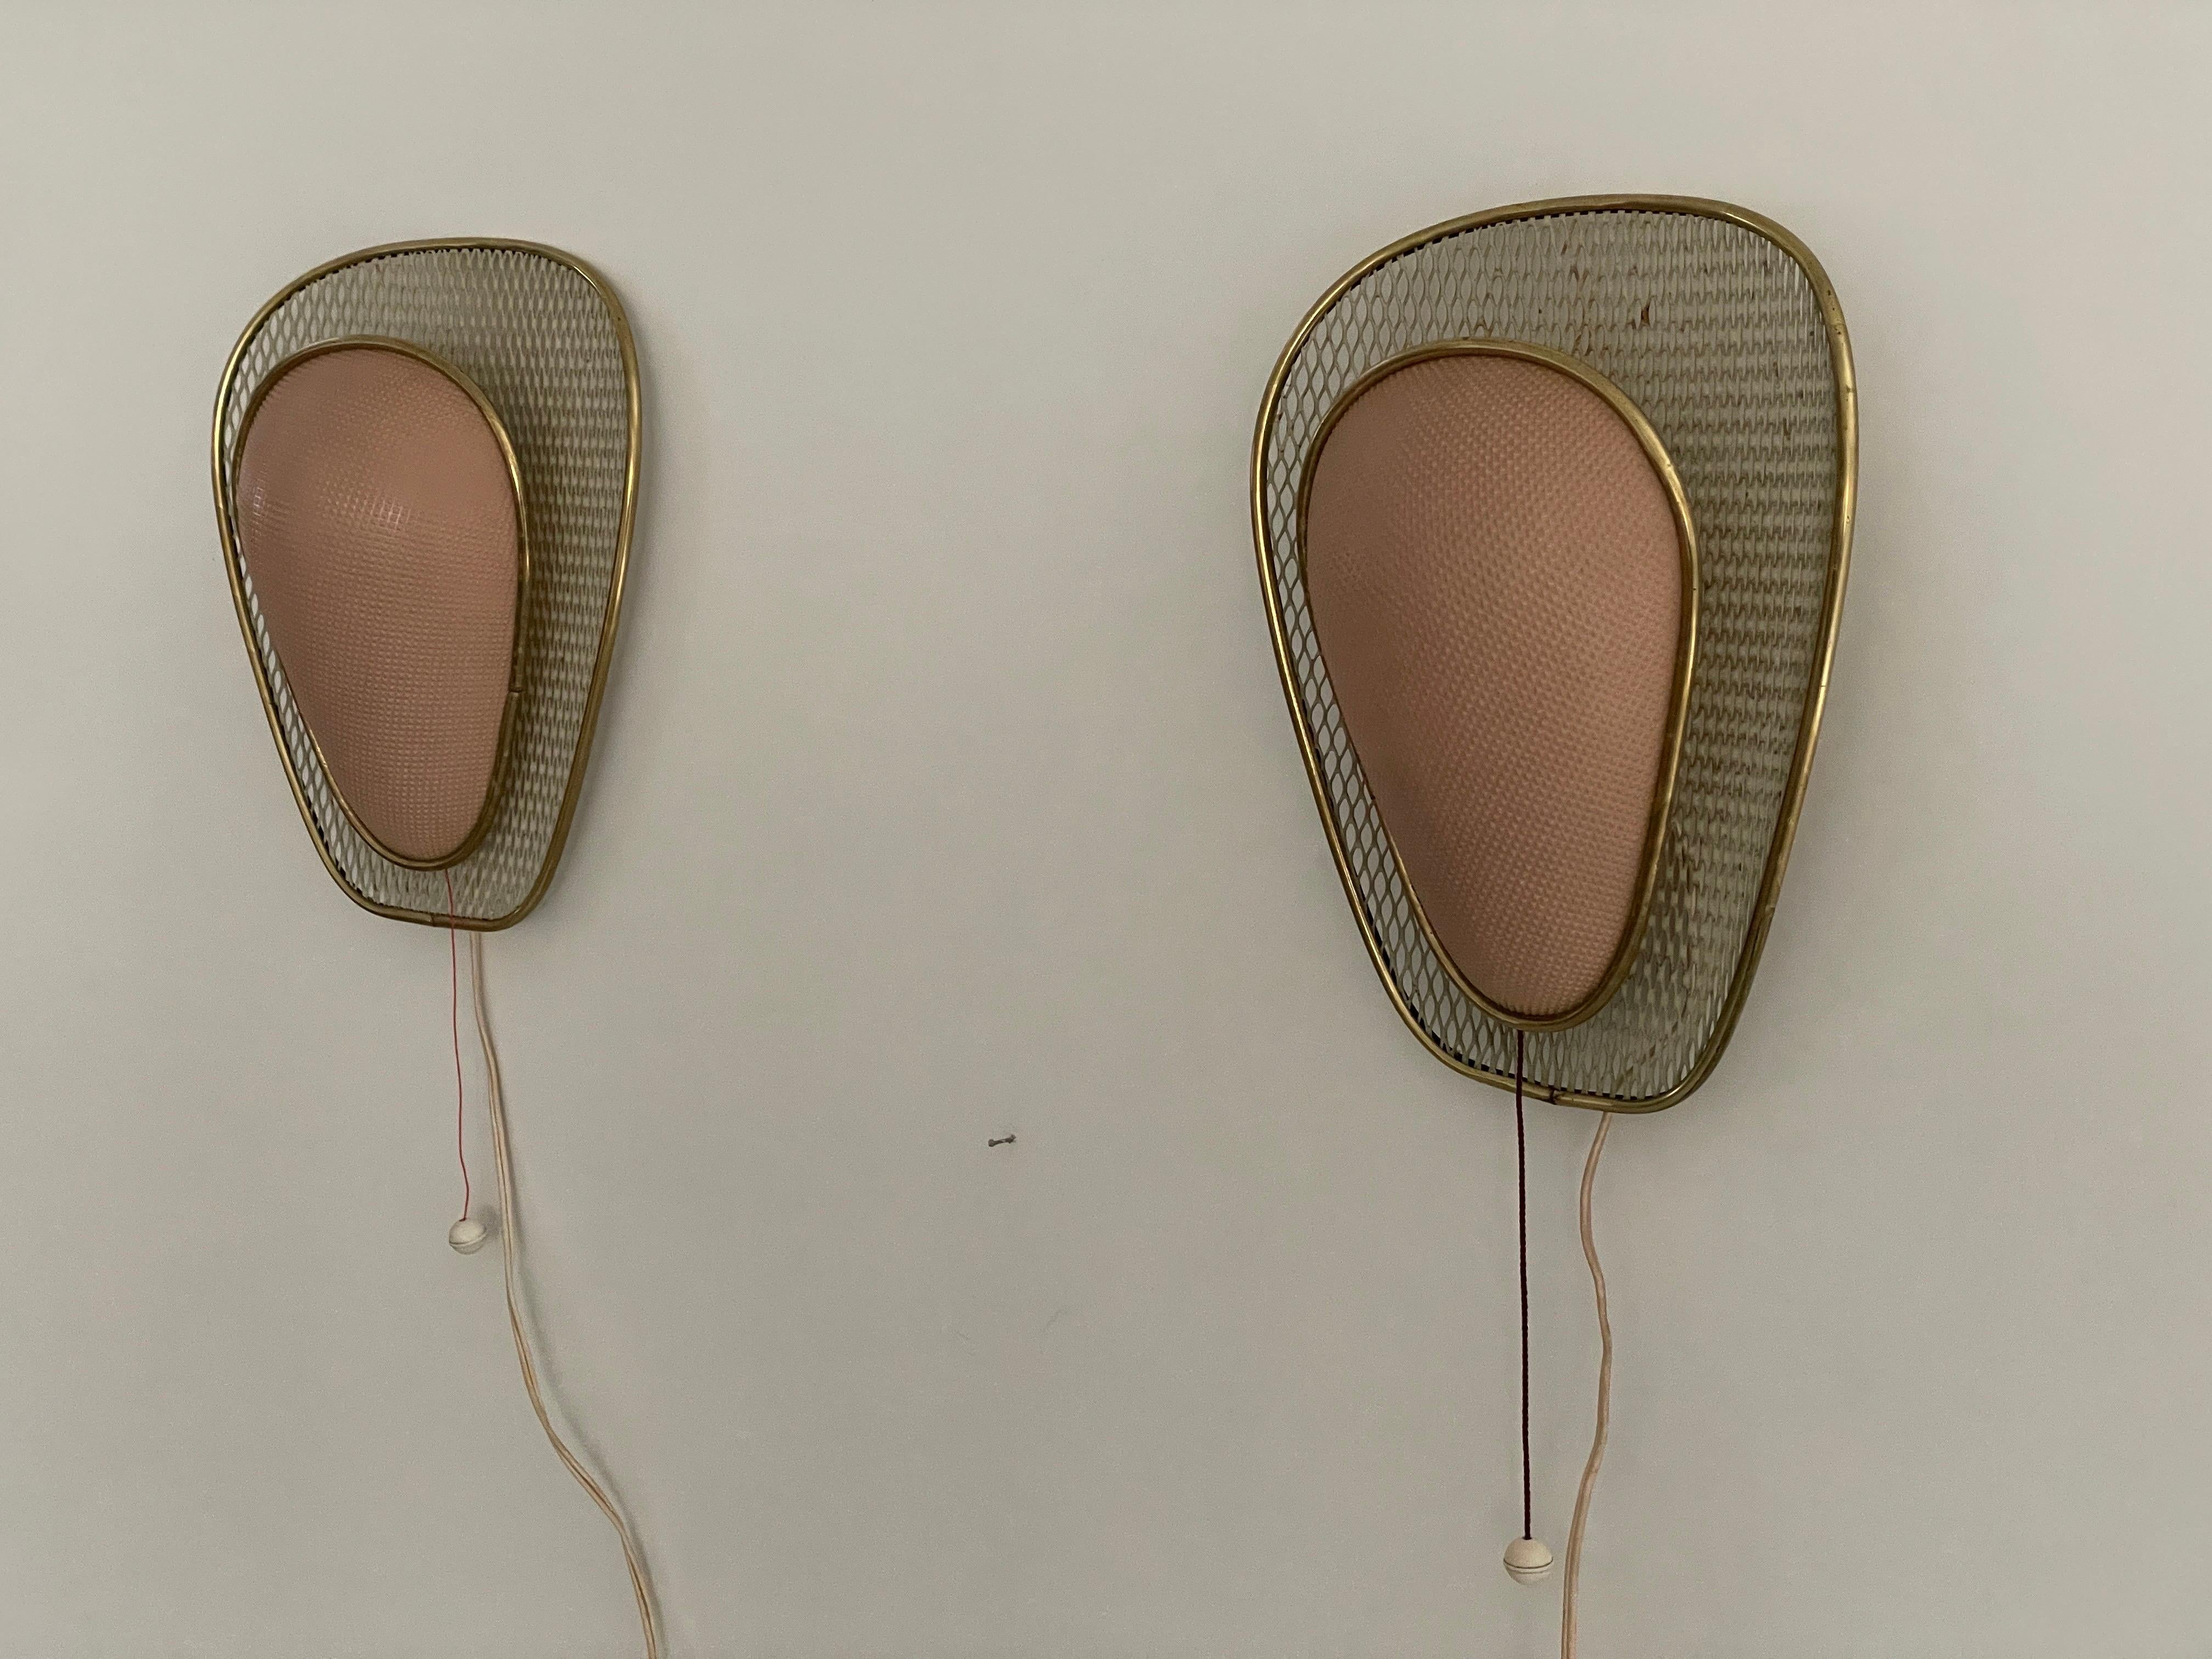 Pink Plastic and Gold Metal Pair of Sconces by Erco, 1950s, Germany

Lampshade is in very good vintage condition.

This lamp works with  E27 light bulbs. 
Wired and suitable to use with 220V and 110V for all countries.

Measurements:
Height: 29